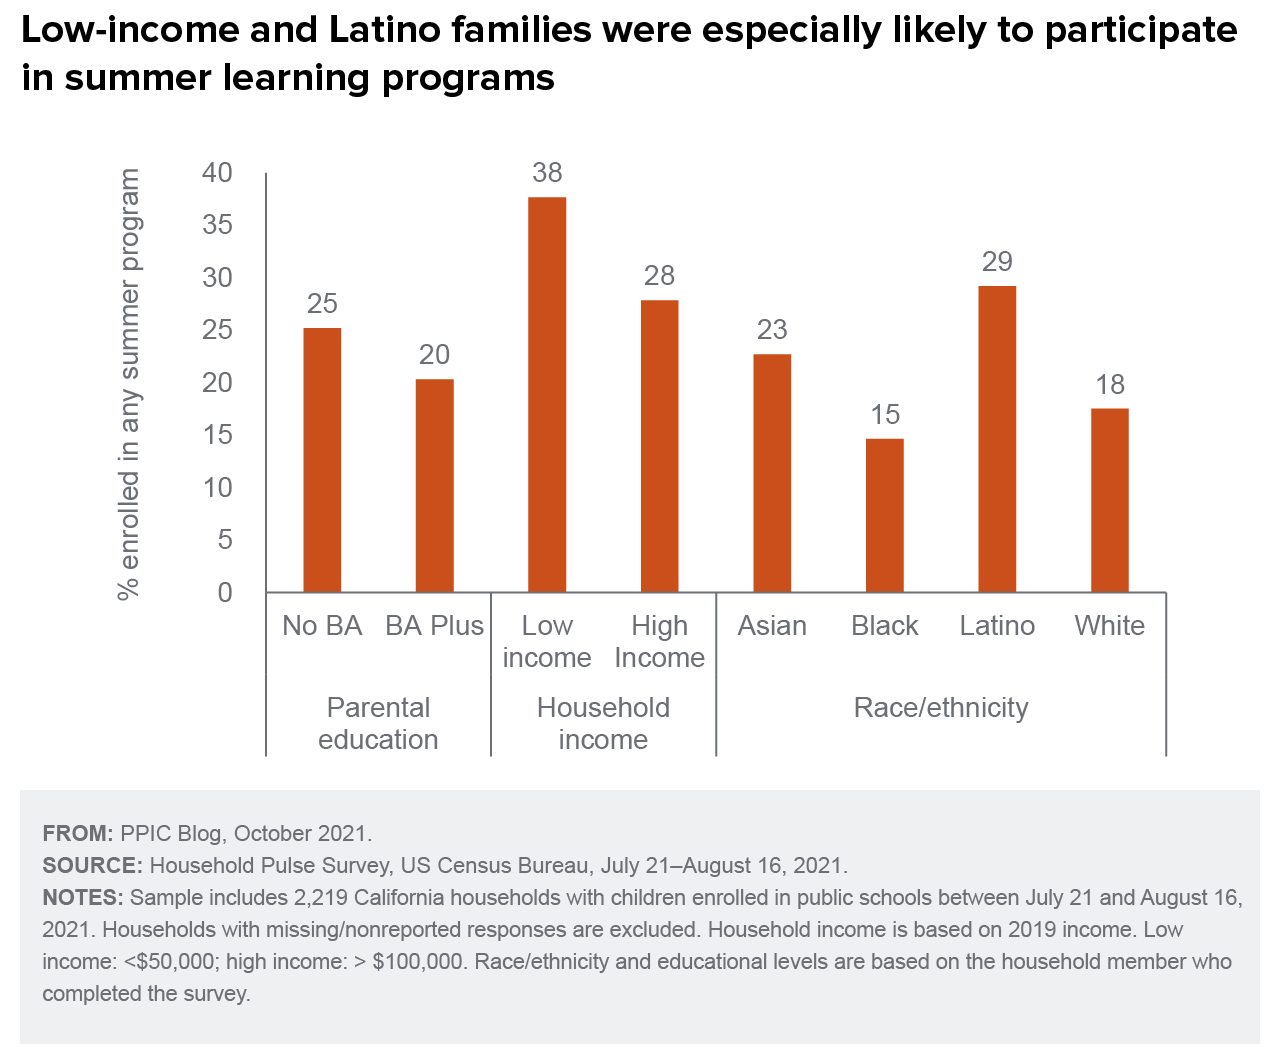 figure - Low-income and Latino families were especially likely to participate in summer learning programs